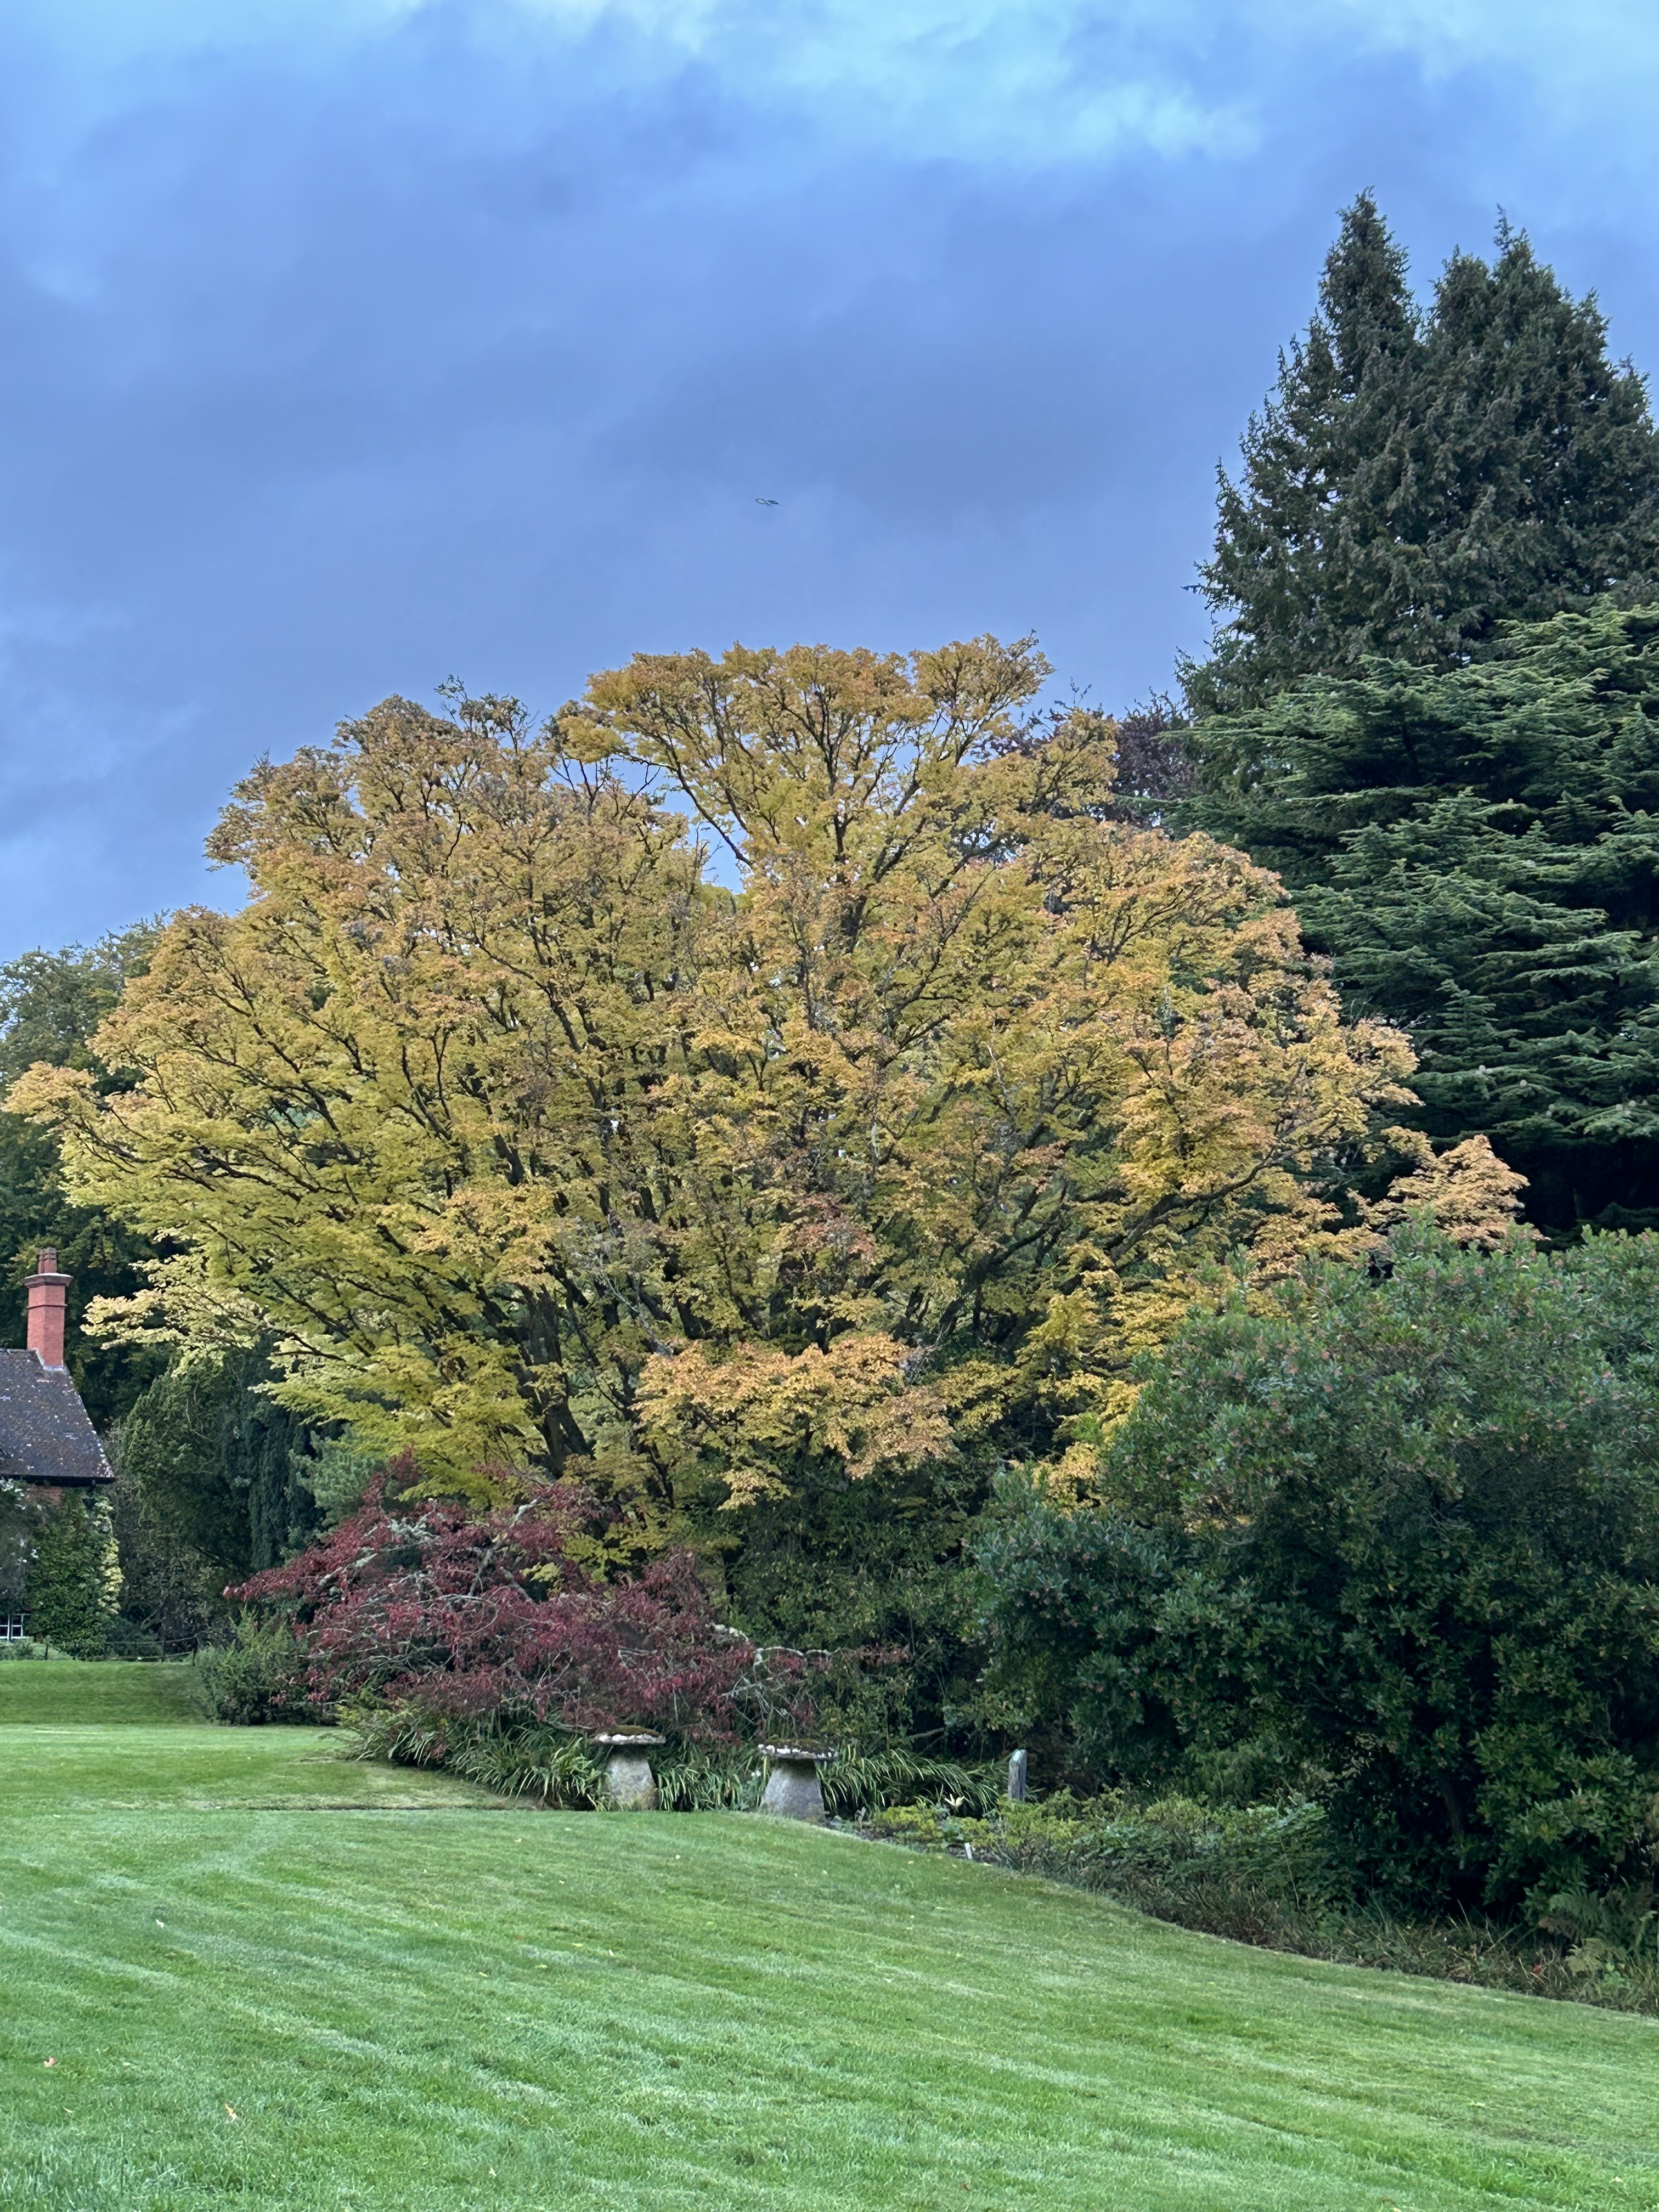 A view across the lawns with large trees in the background